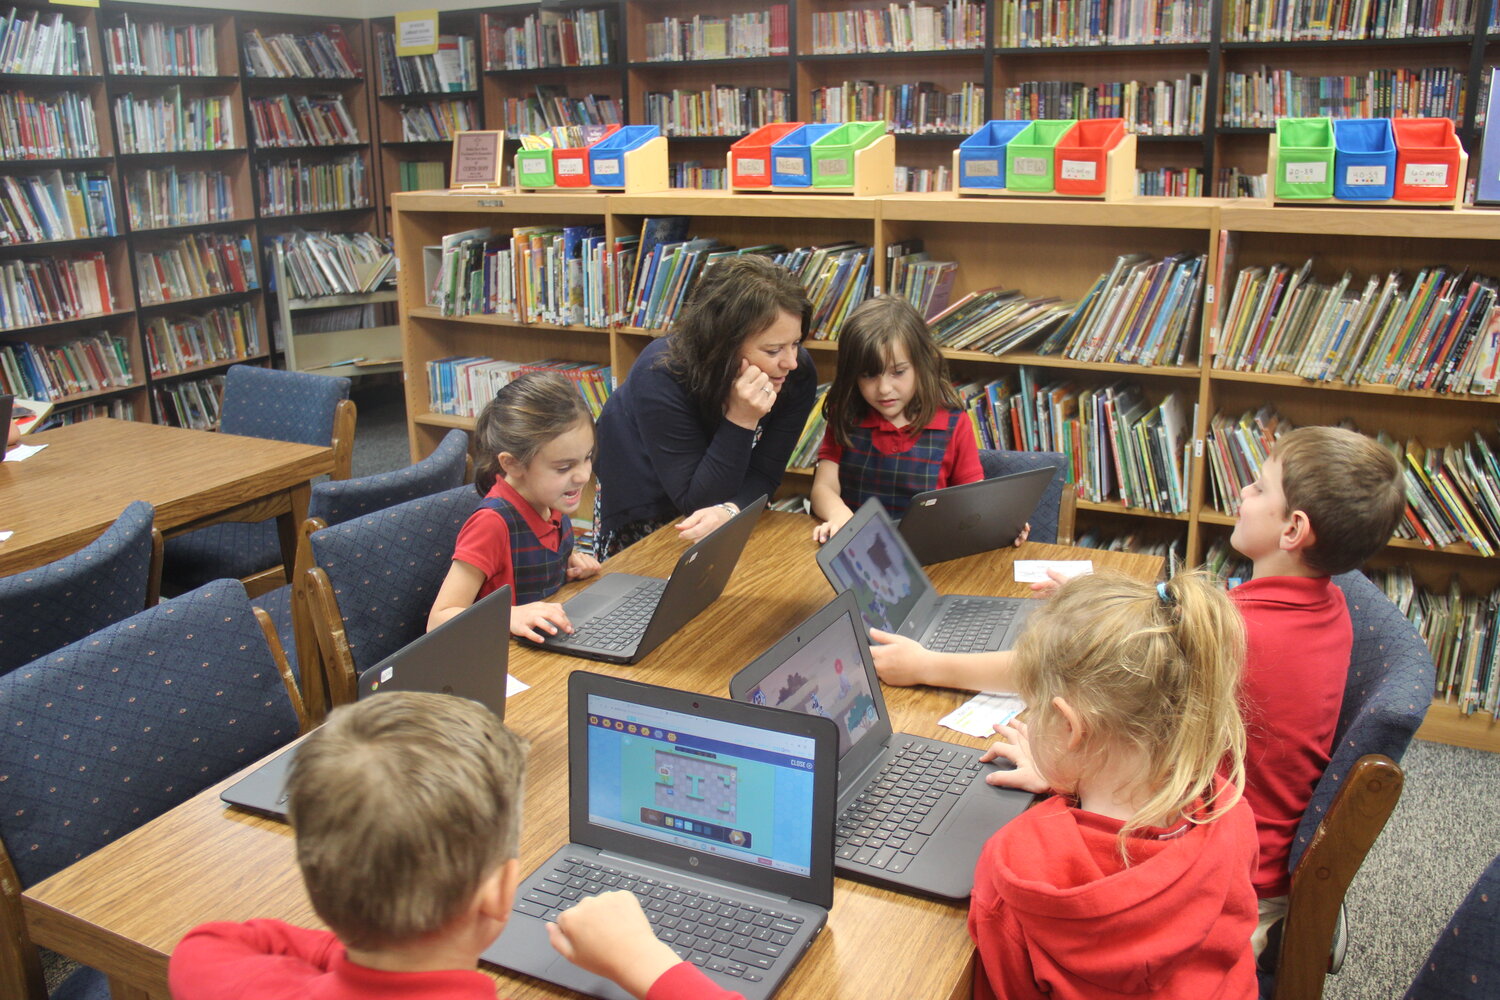 Holy Rosary Principal Lori Racine works with Elizabeth Weisler and Delilah Bennett during technology class in the school’s library on May 15.